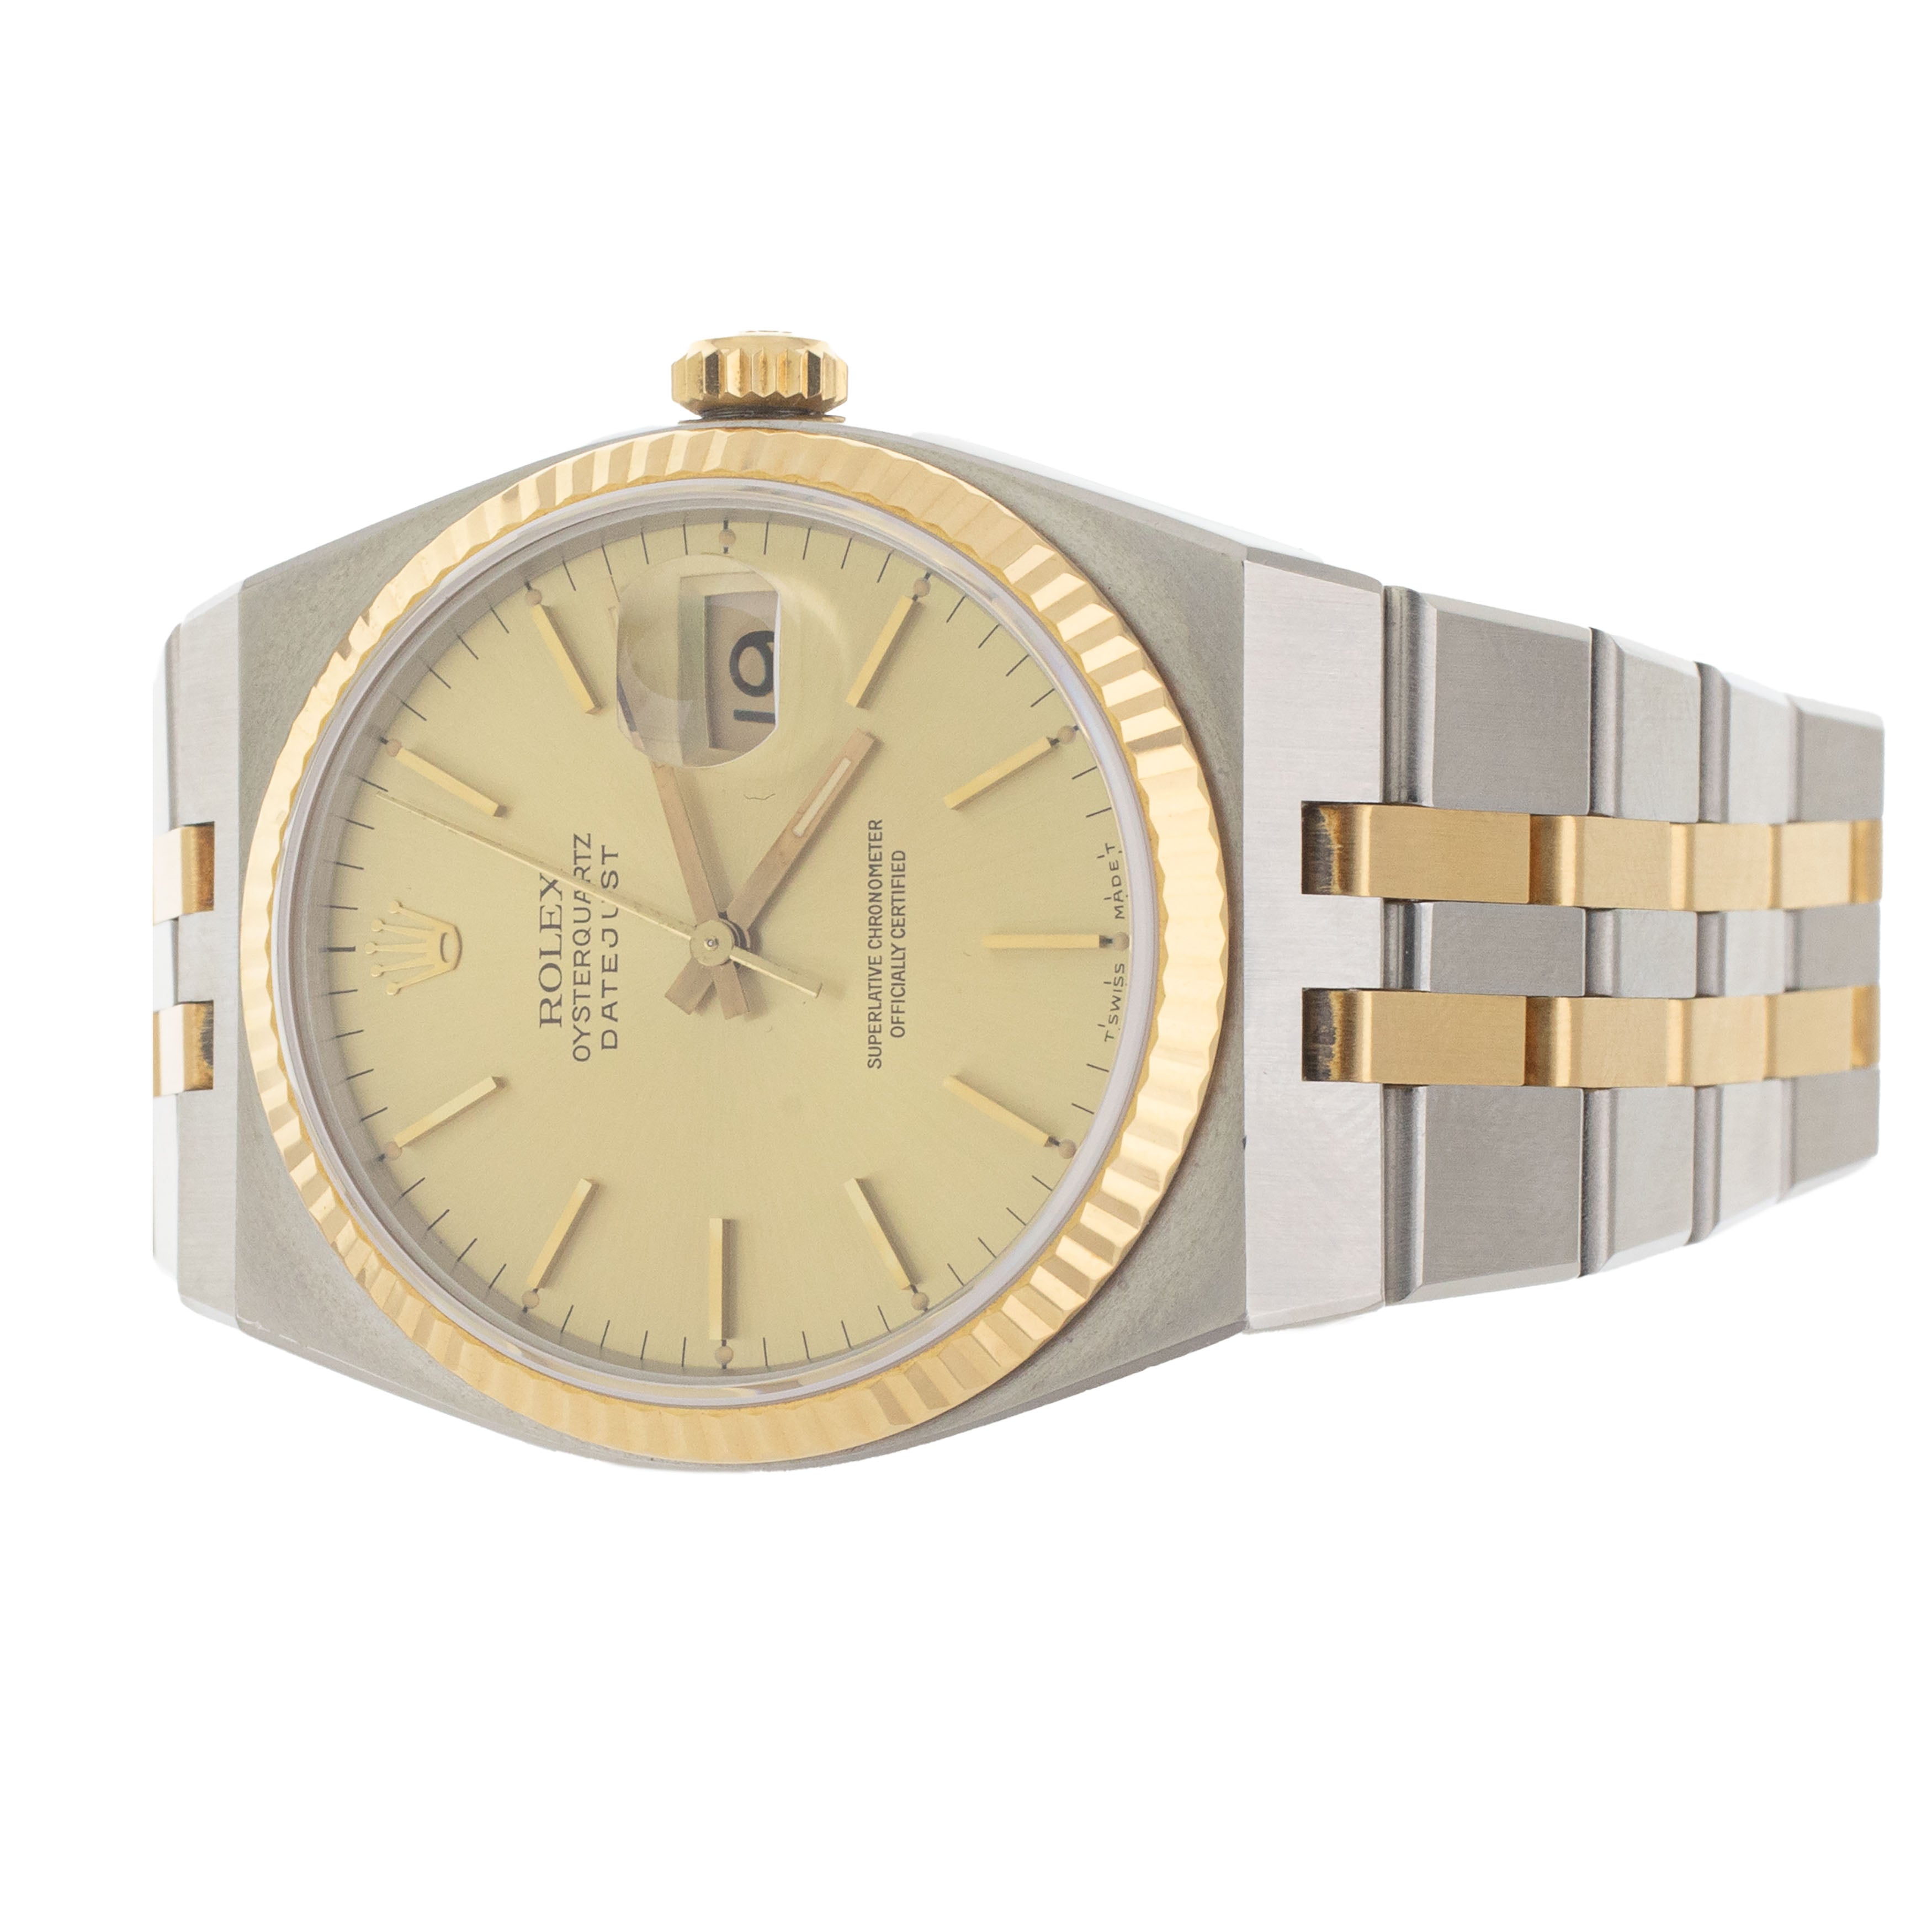 Rolex Datejust Oysterquartz Stainless Steel Gold Dial 36mm 17013